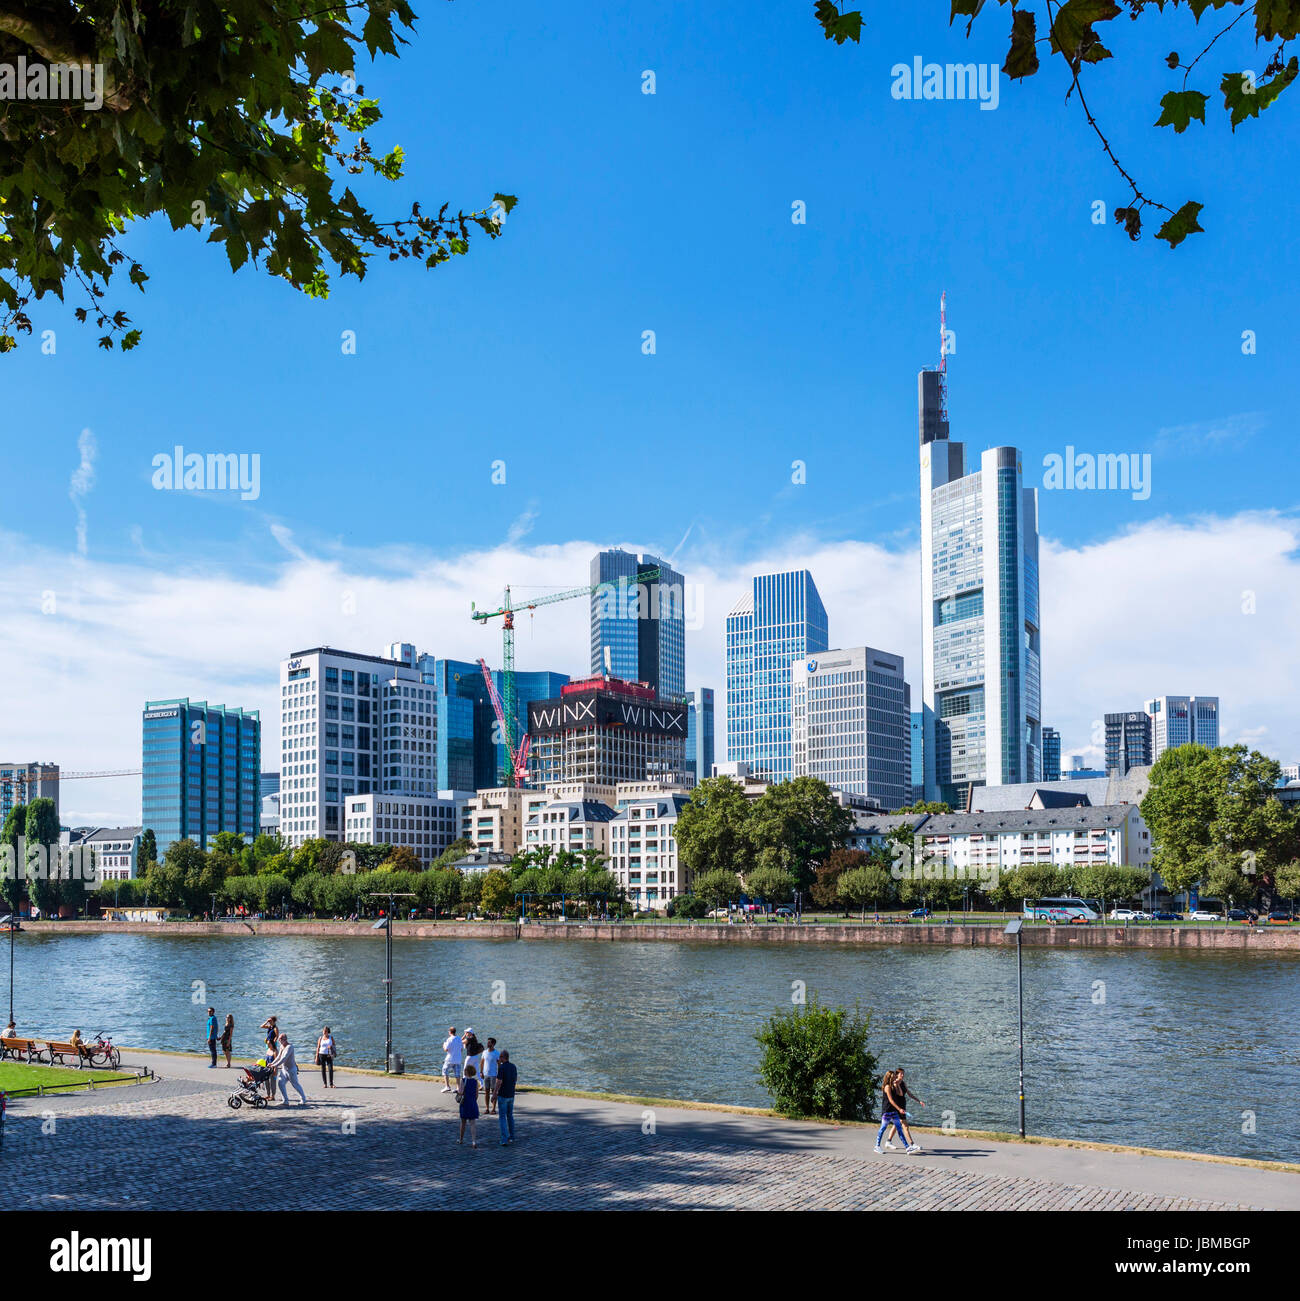 Frankfurt skyline. View towards the financial district from the banks of the River Main, Frankfurt am Main, Hesse, Germany Stock Photo